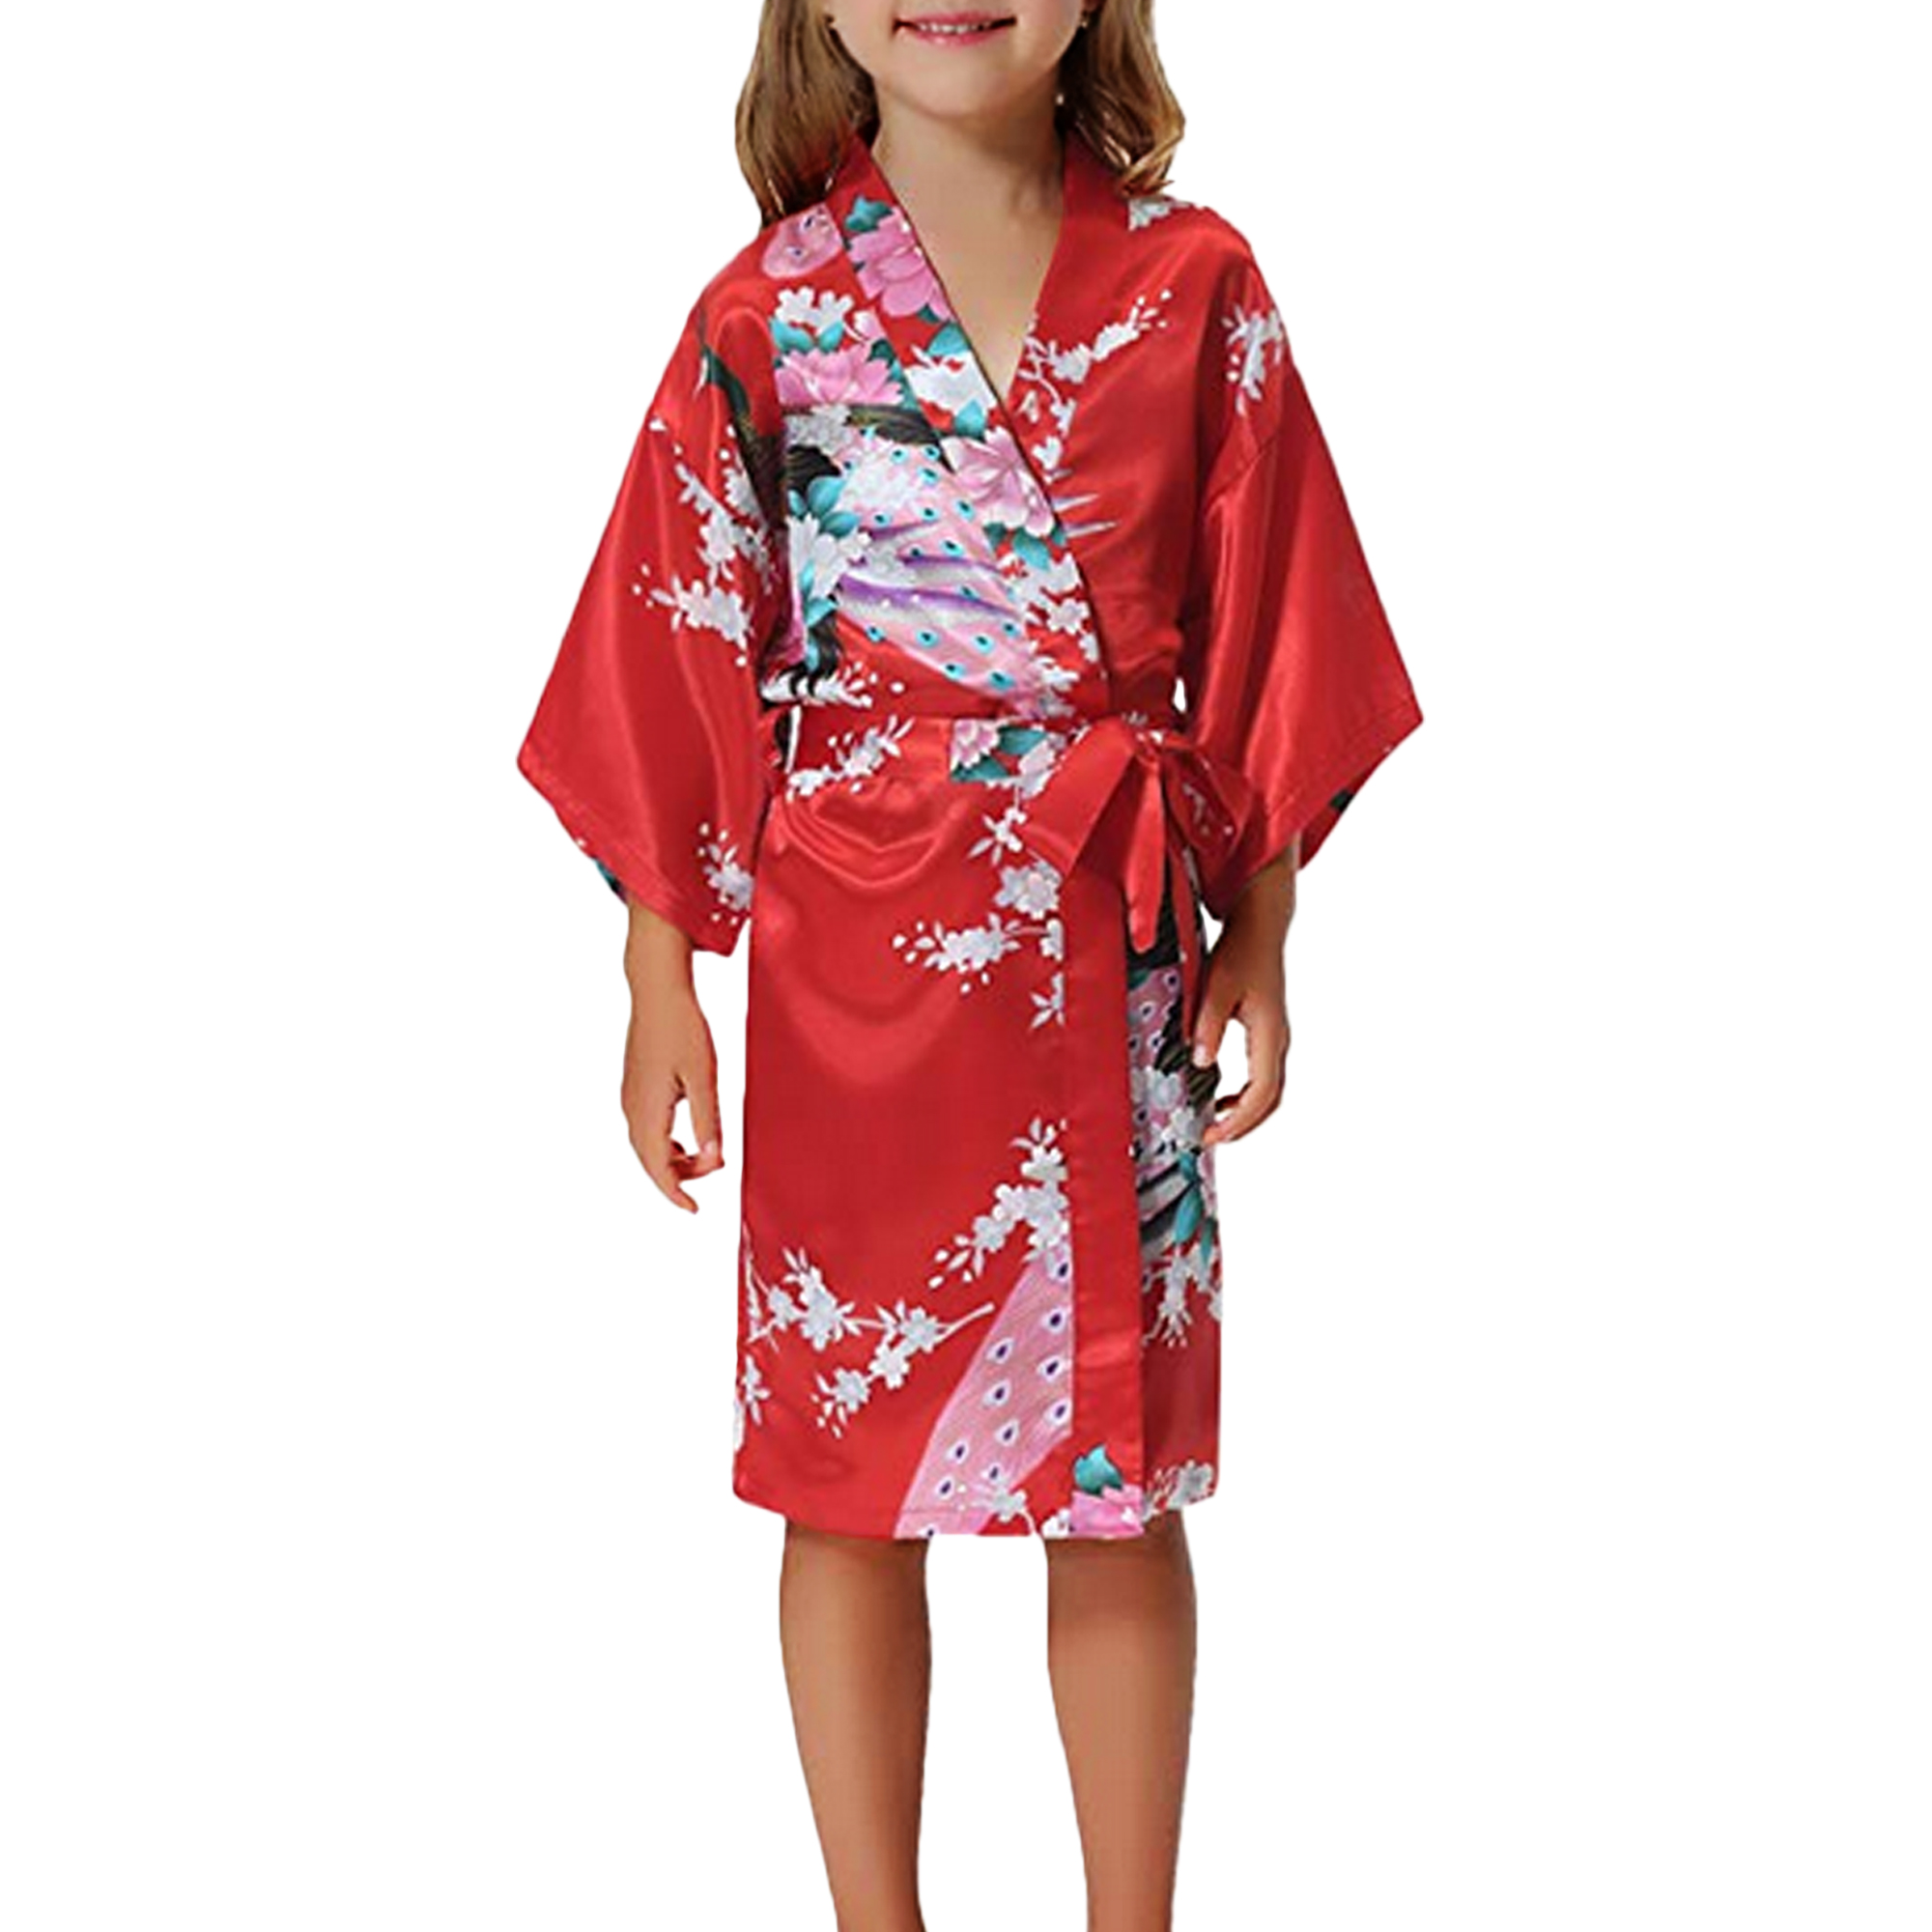 Gifts Are Blue Girls Robes, Floral, Sizes 2T-14, Flower Girl Robes, Spa Party